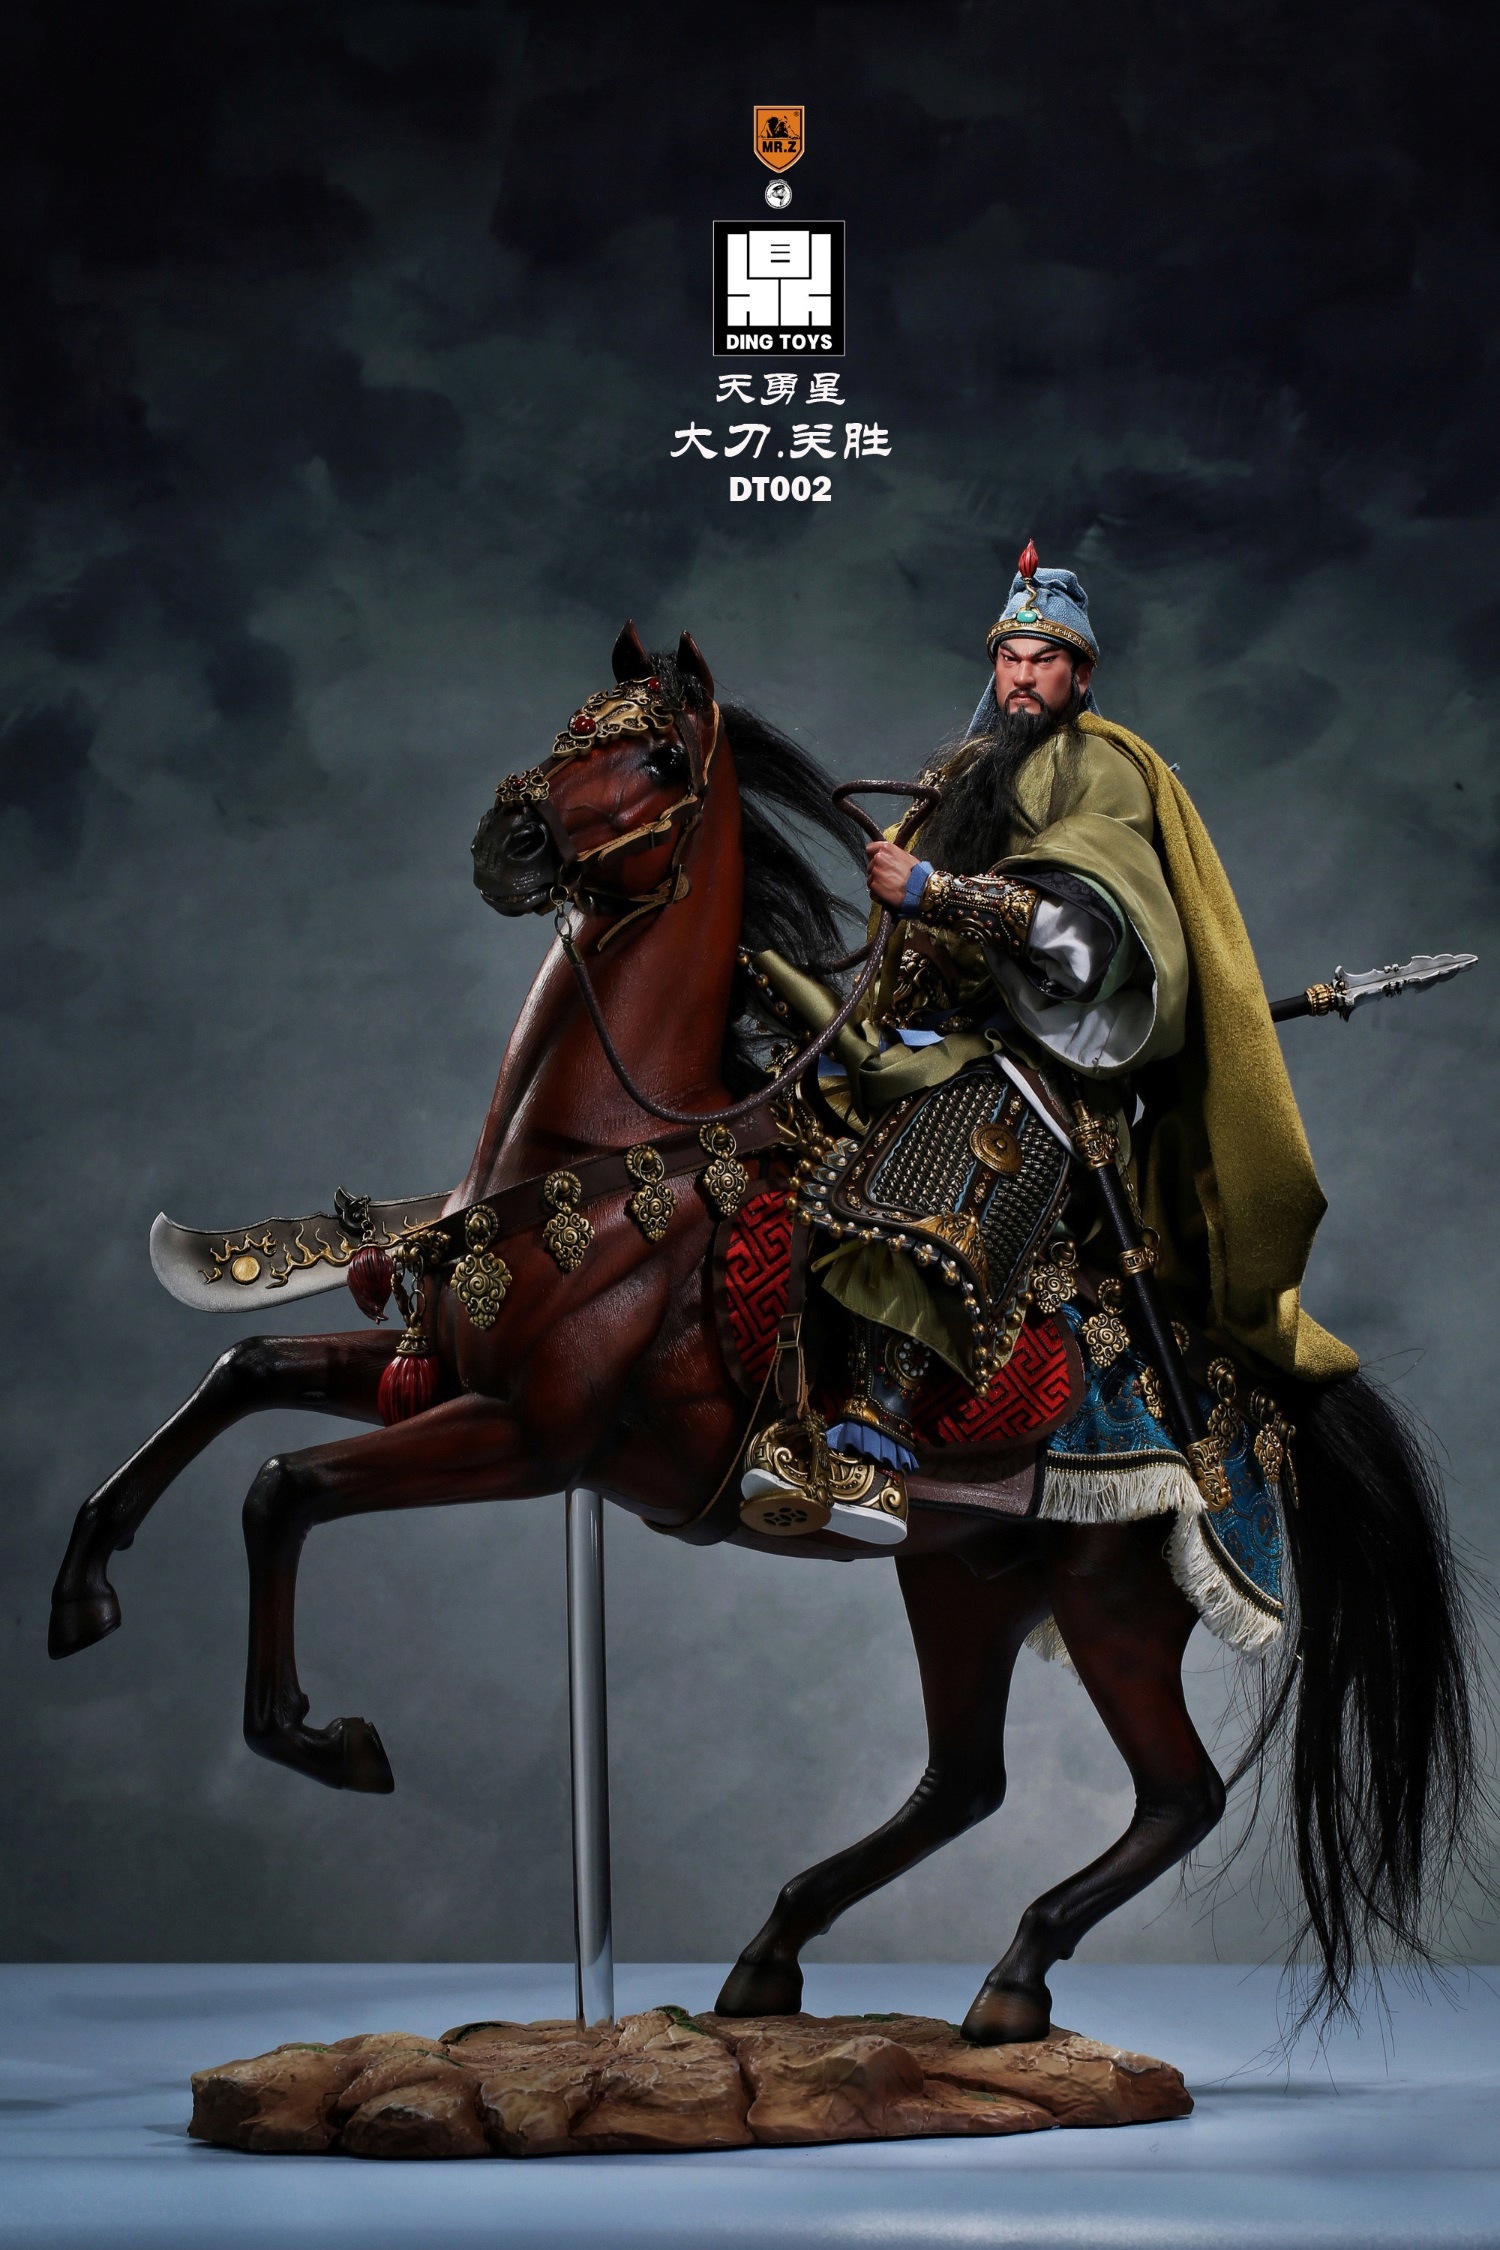 MrZ - NEW PRODUCT: Mr.Z x Ding Toys DT002 1/6 Scale 《Water Margin》Guan Sheng, War Horse 08153